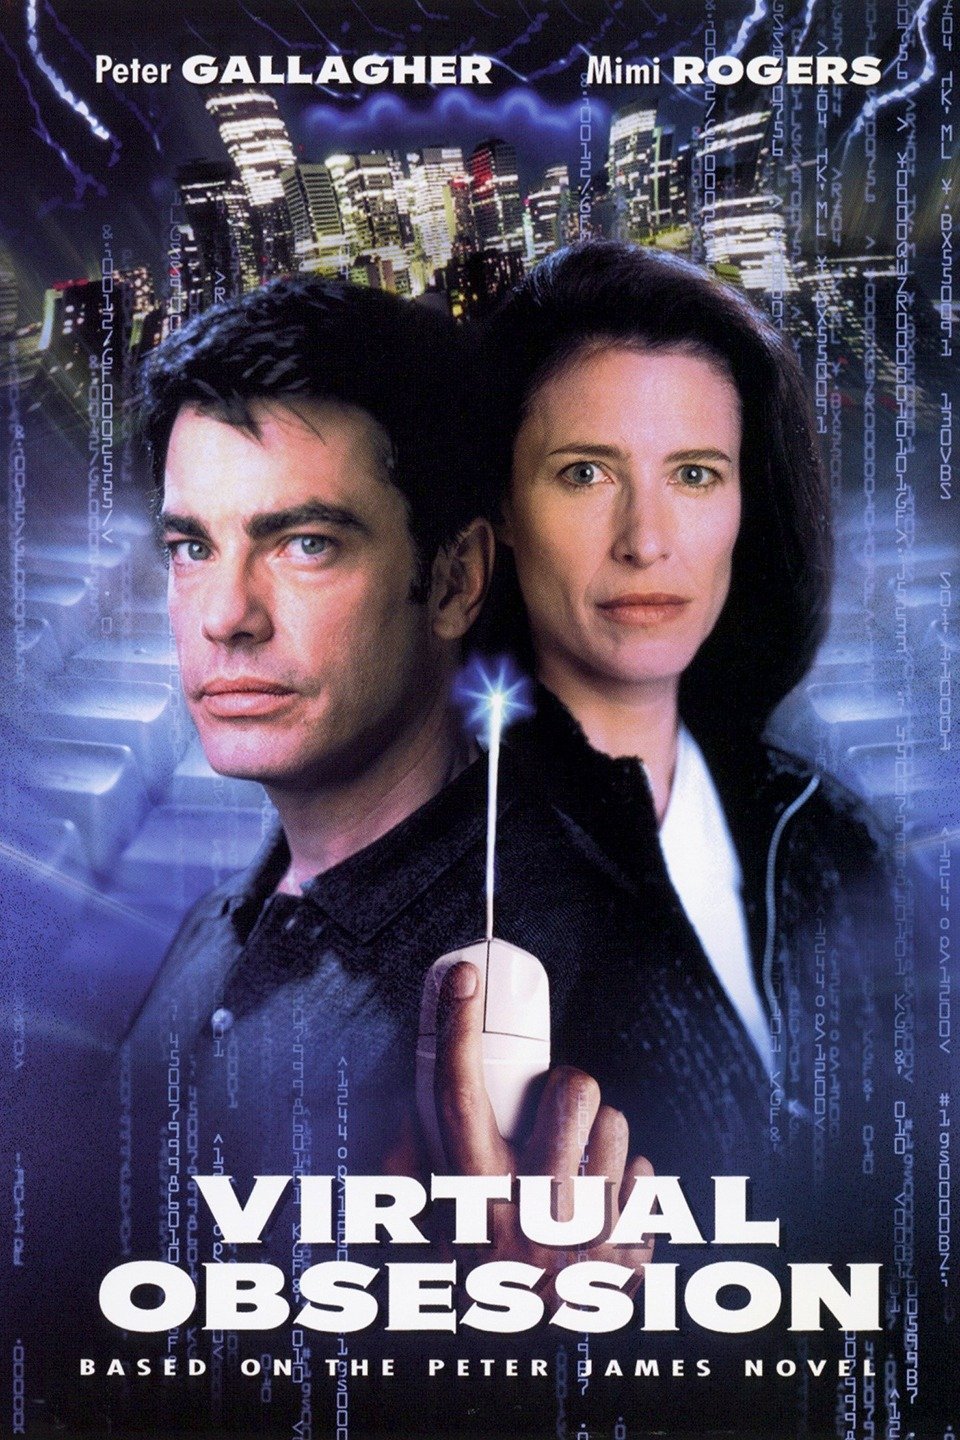 Poster of the movie Virtual Obsession